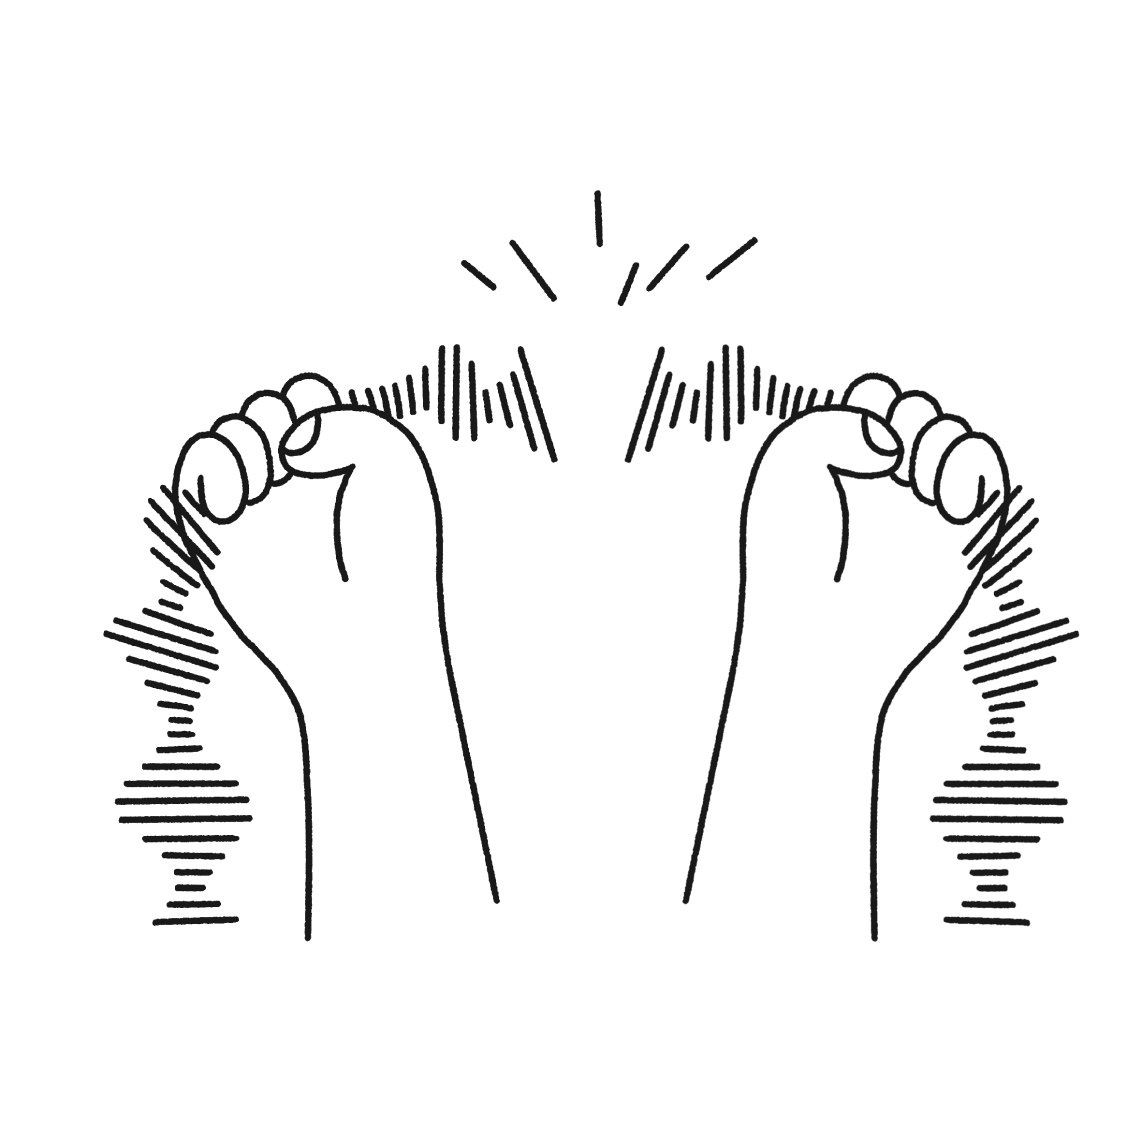 Illustration showing two hands holding a sound wave and snapping it in two.